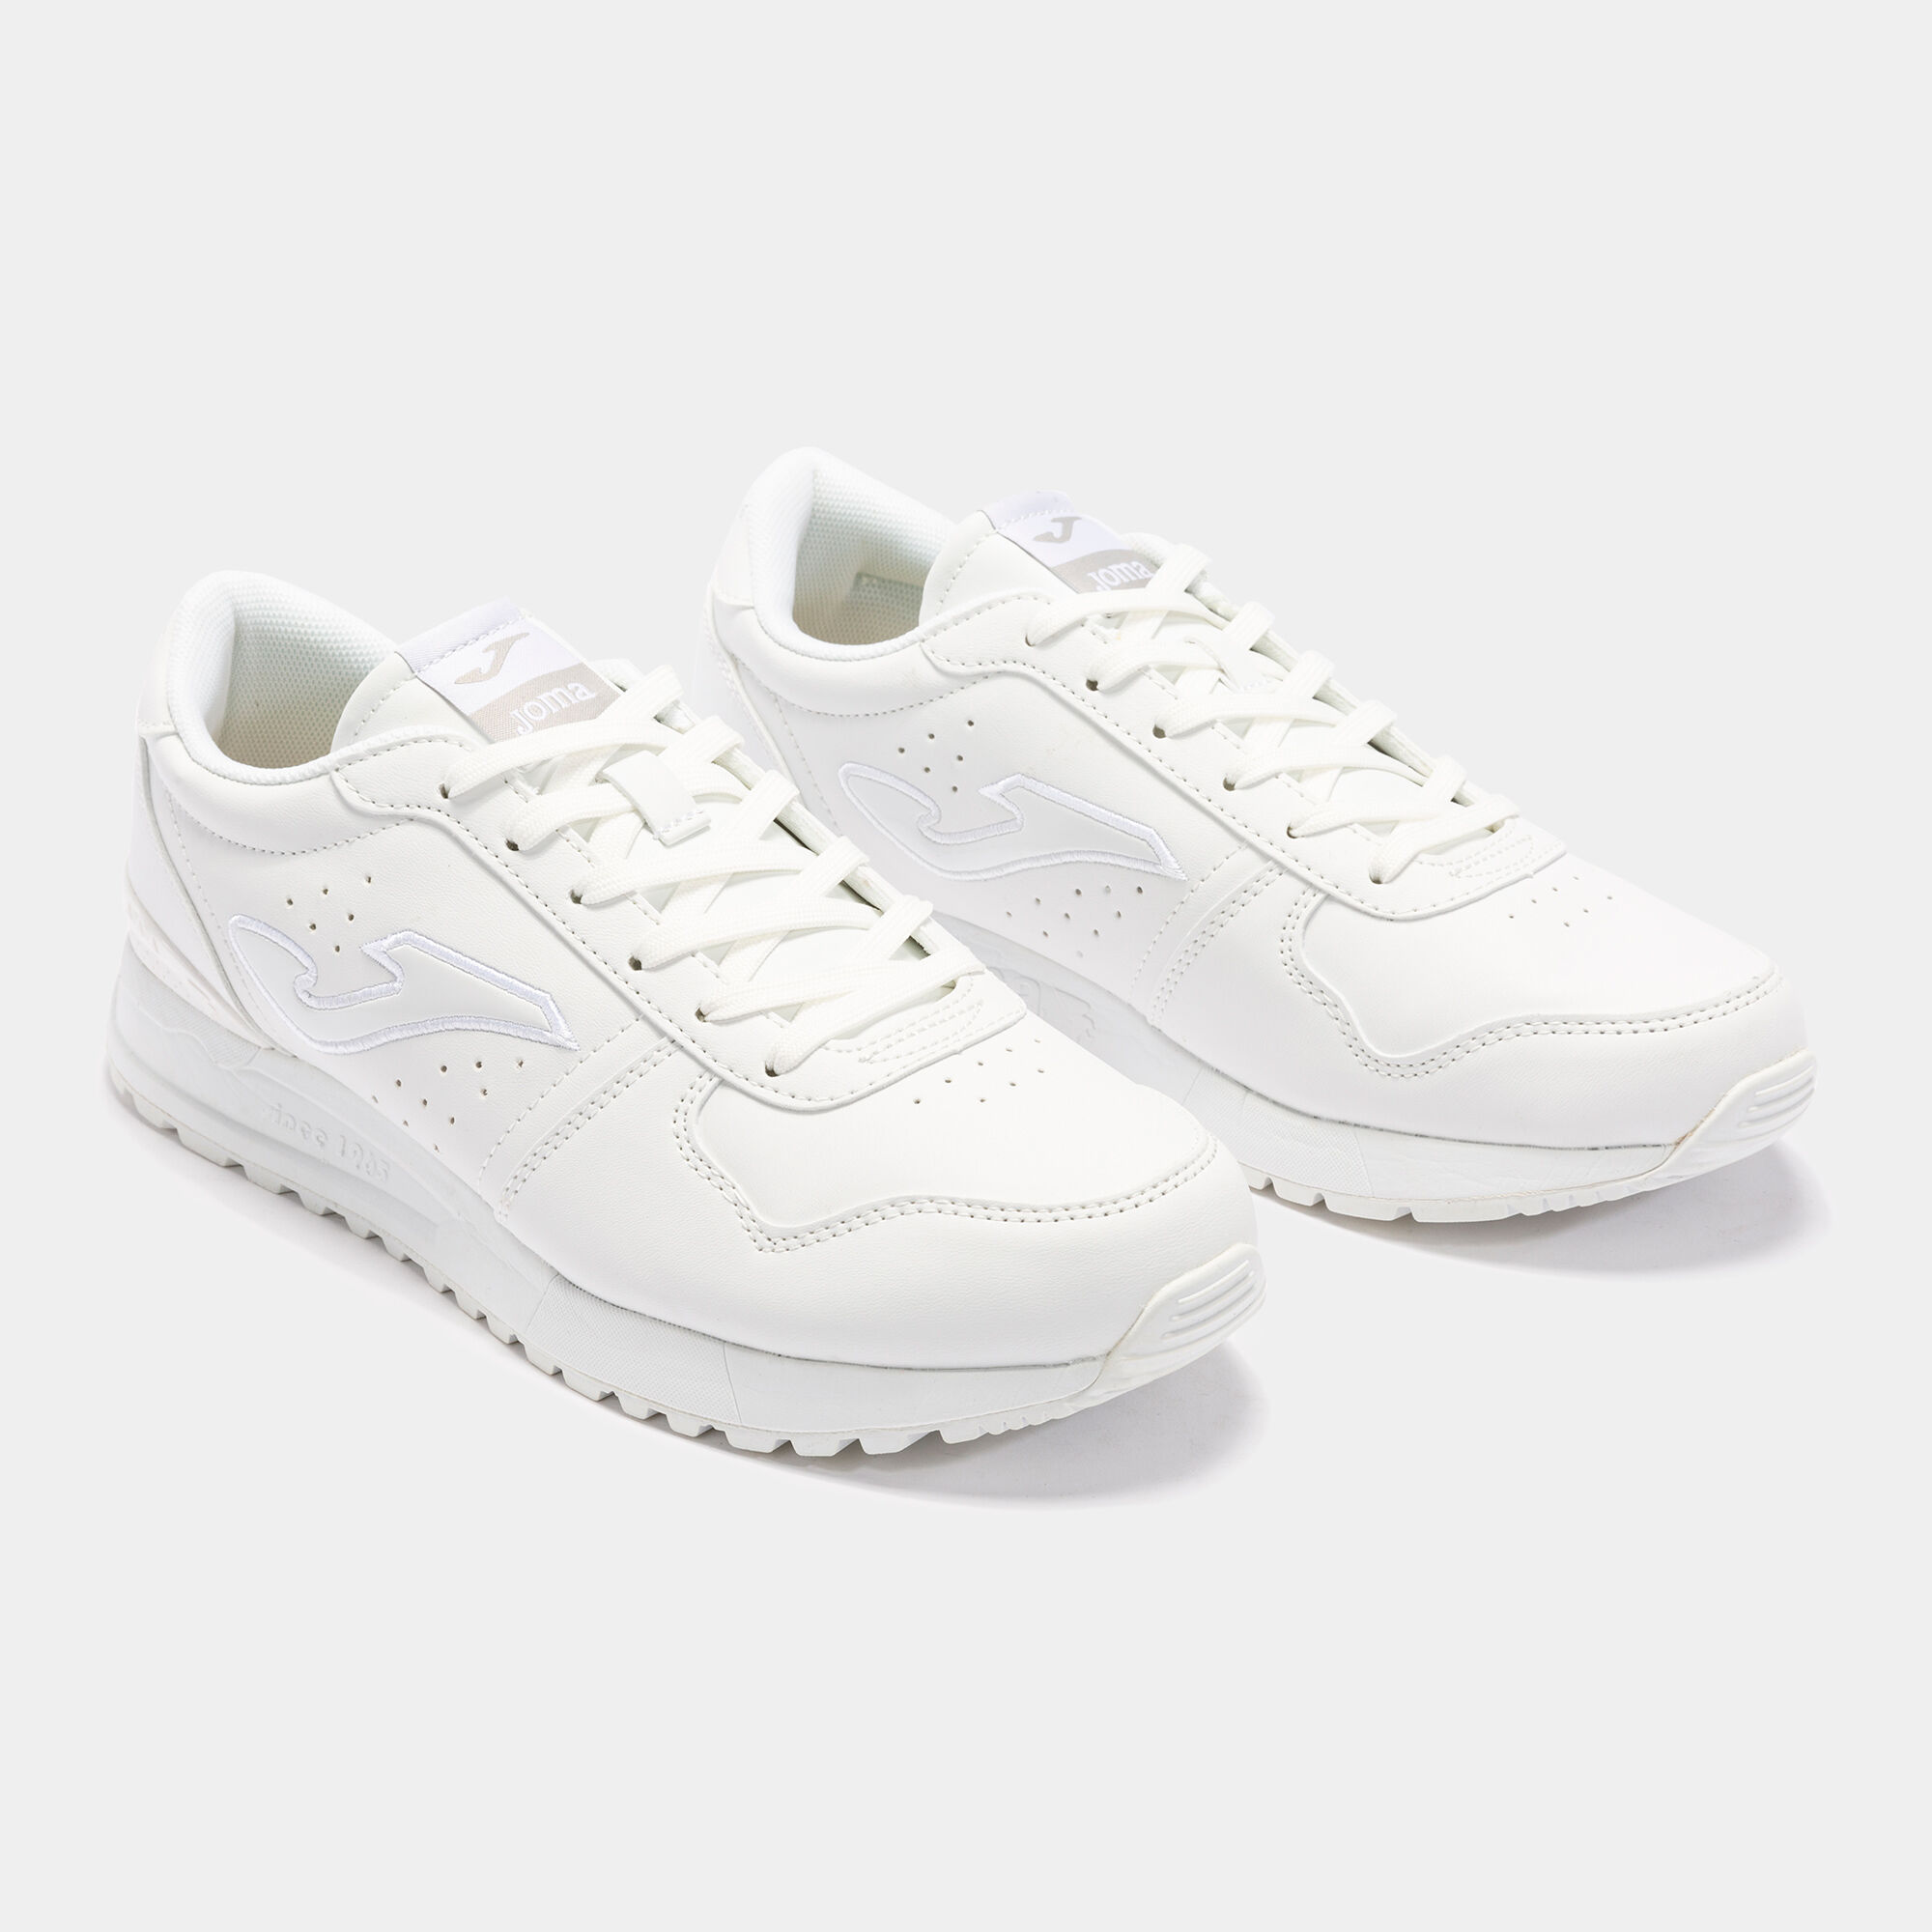 CHAUSSURES CASUAL C.203 21 FEMME BLANC